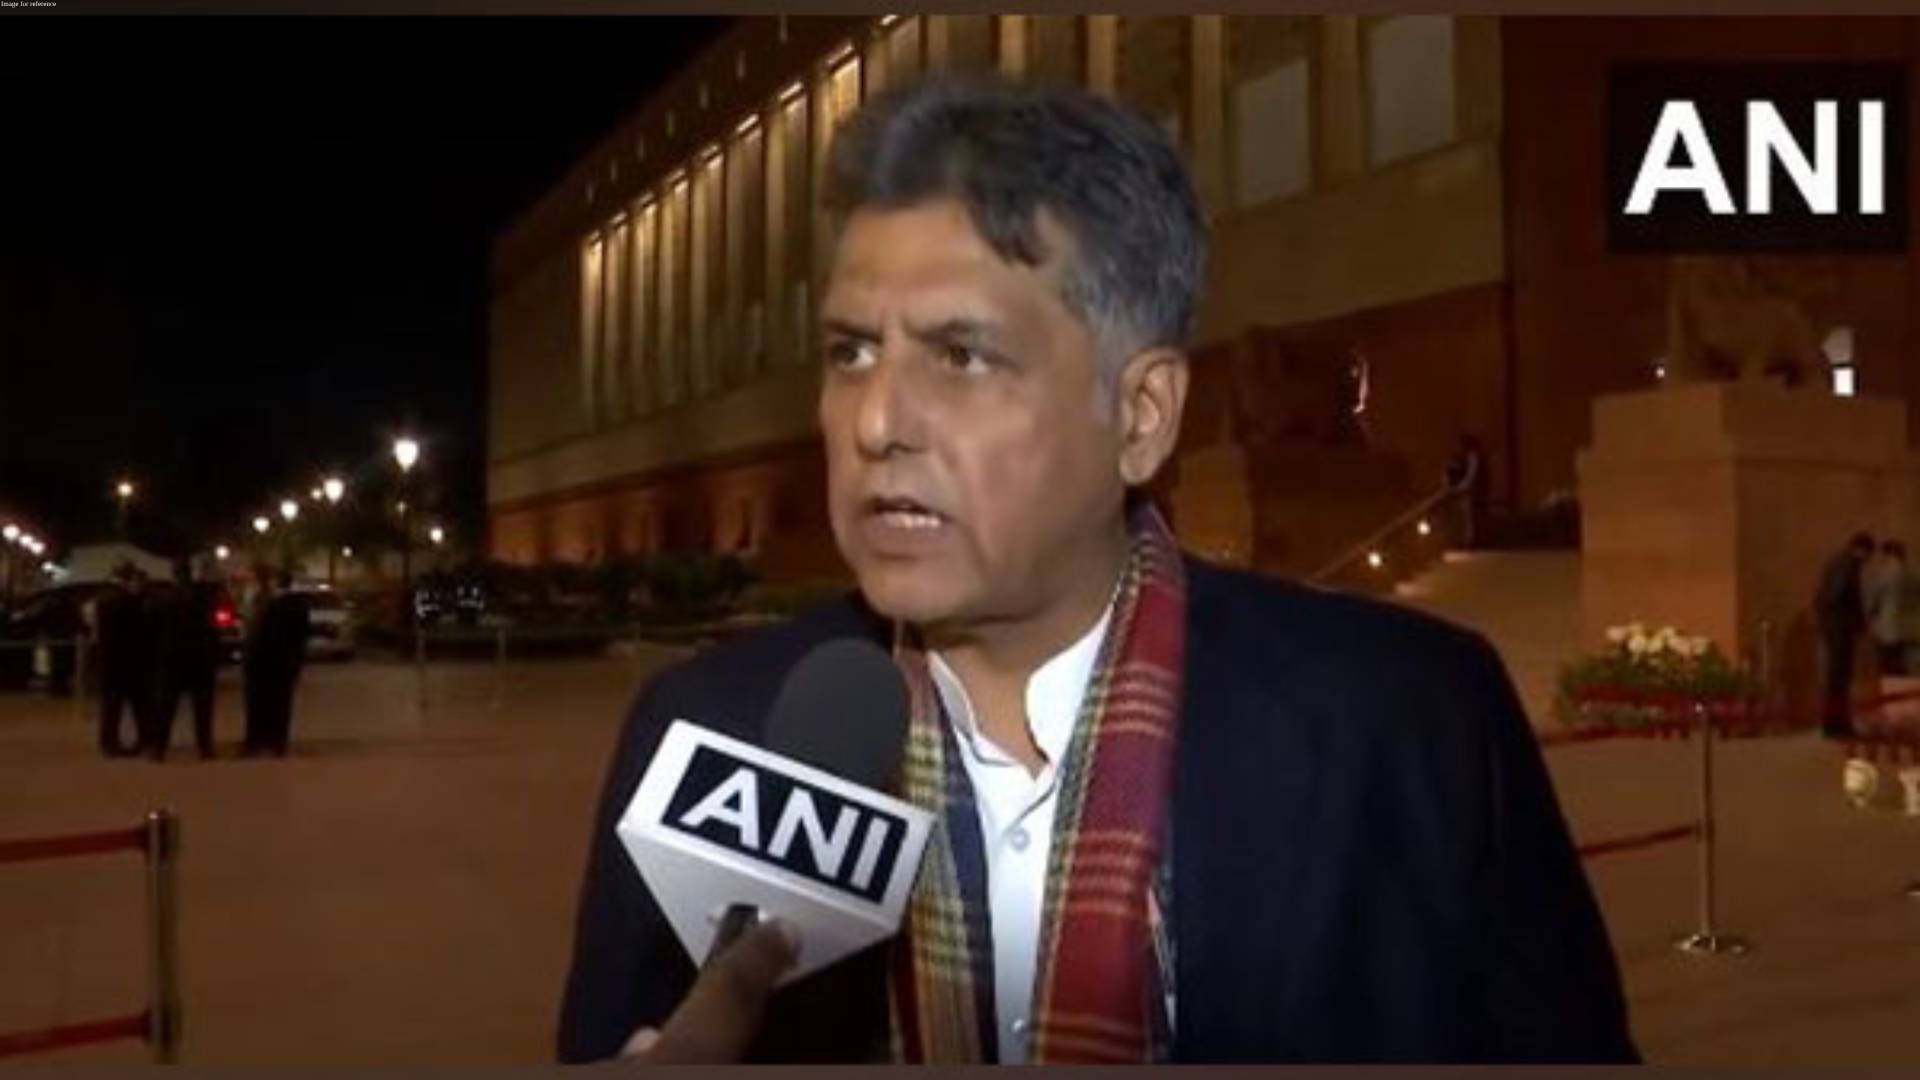 After Kamal Nath, media reports claim Cong old-timer Manish Tewari giving thought to BJP switch